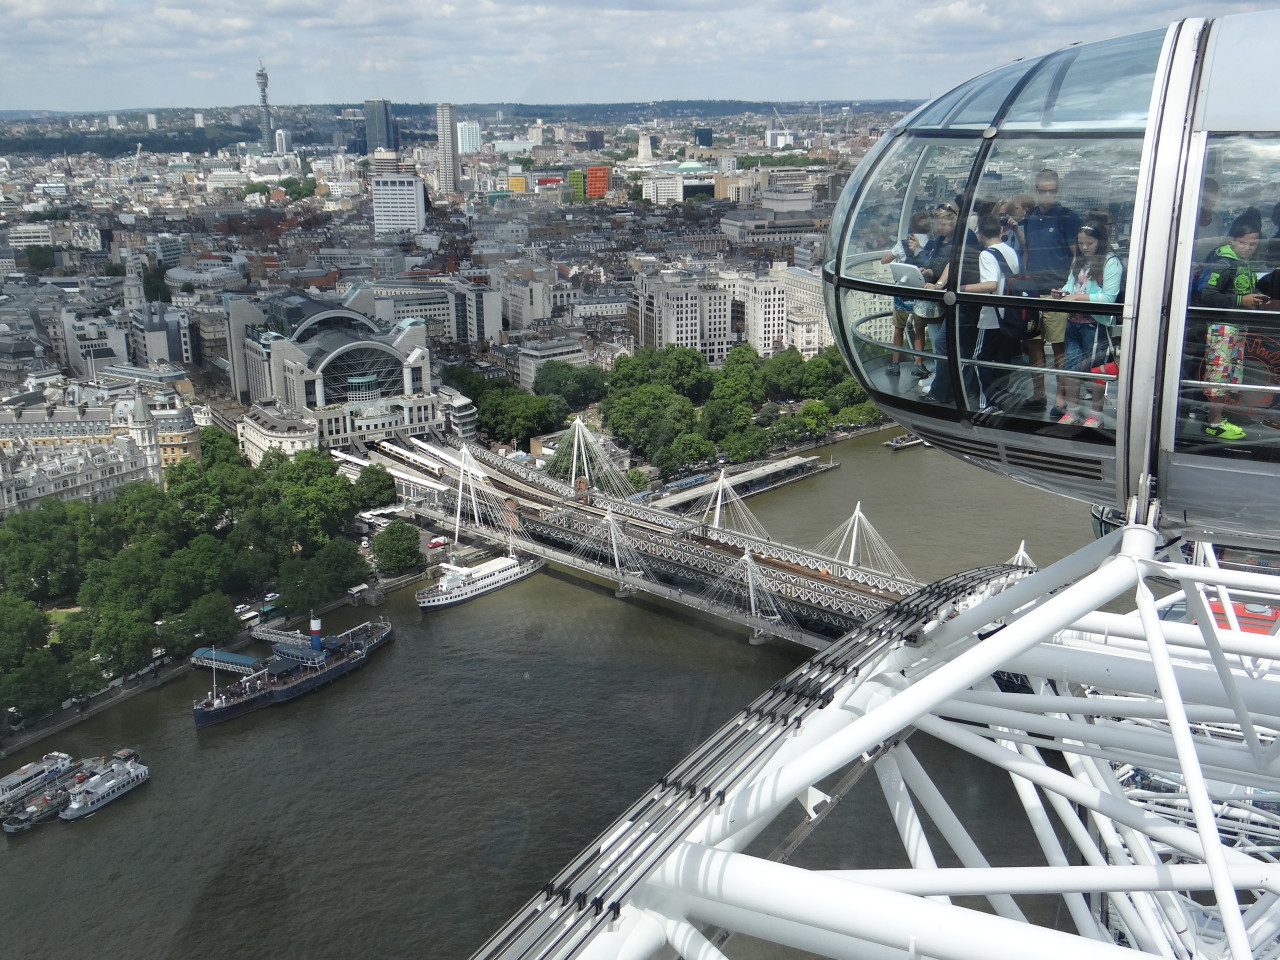 The London Eye capsule at the top